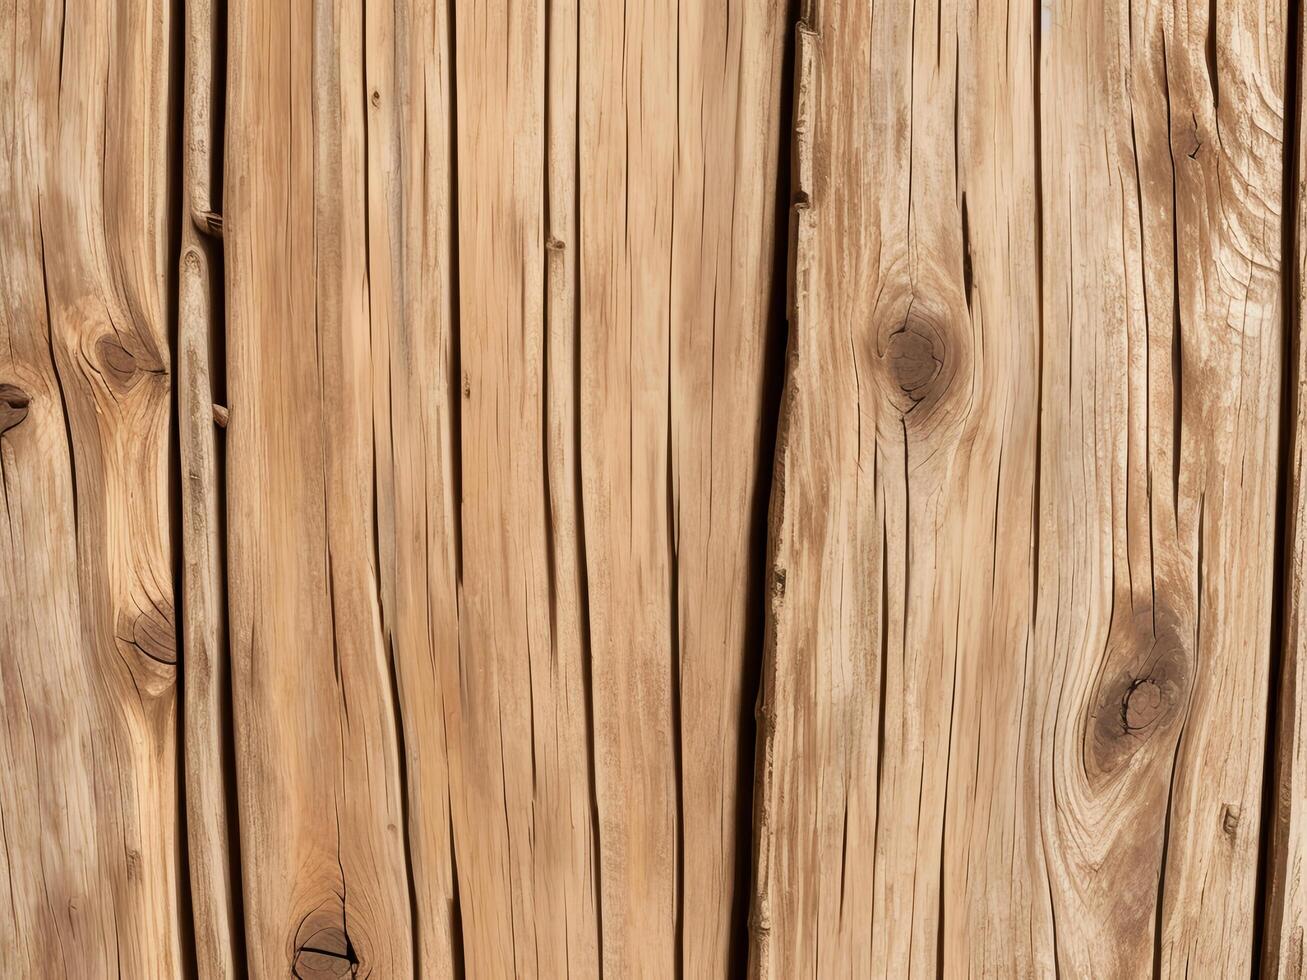 wooden texture high quality image background photo